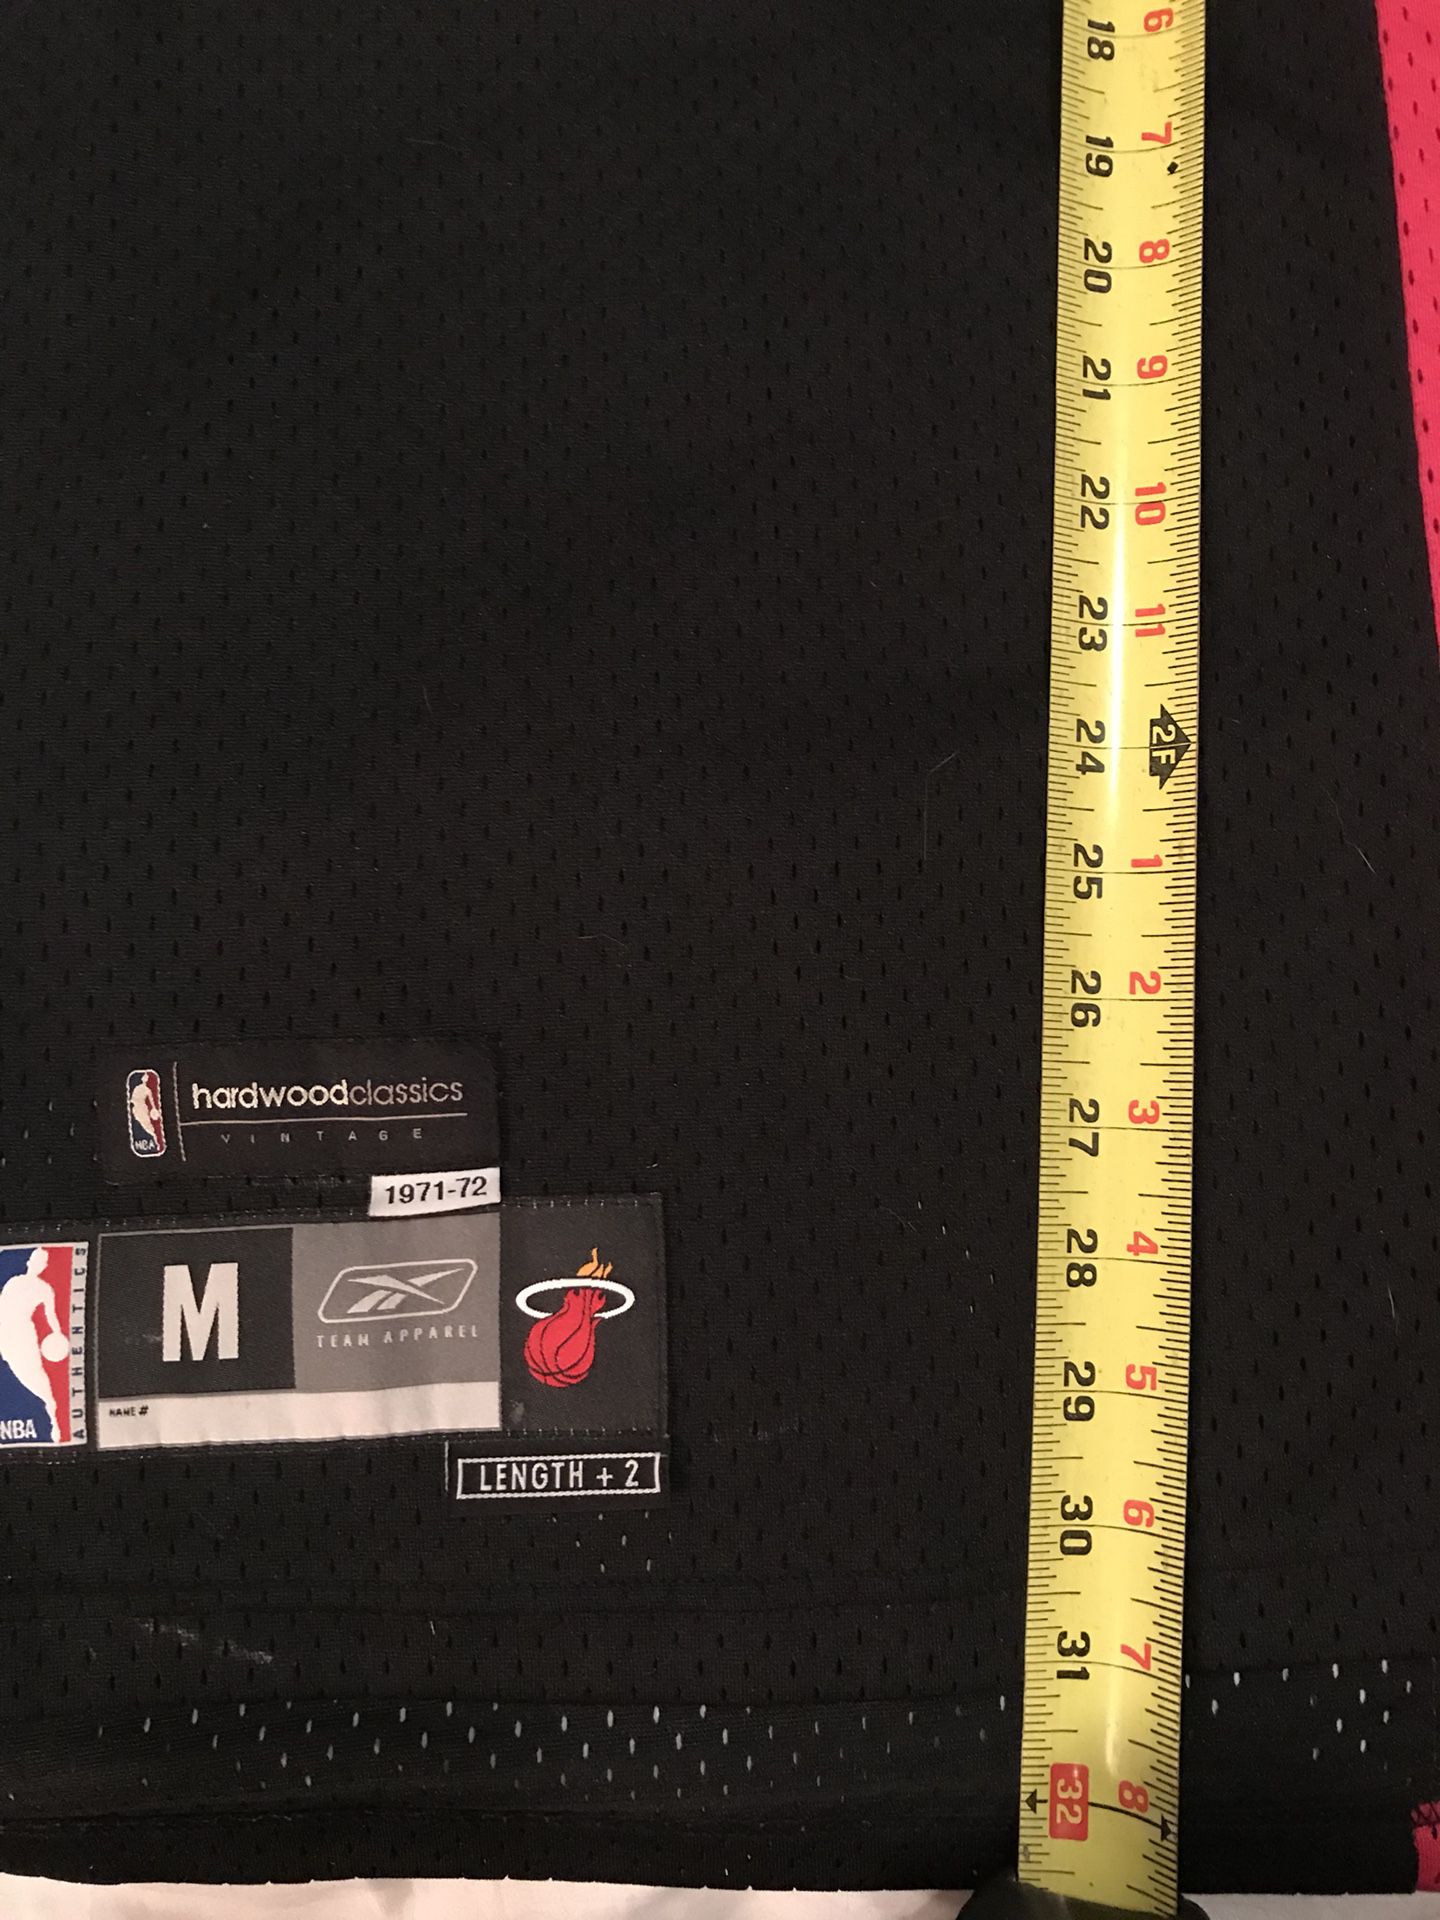 Mens Small Miami Heat Jersey for Sale in Hialeah, FL - OfferUp